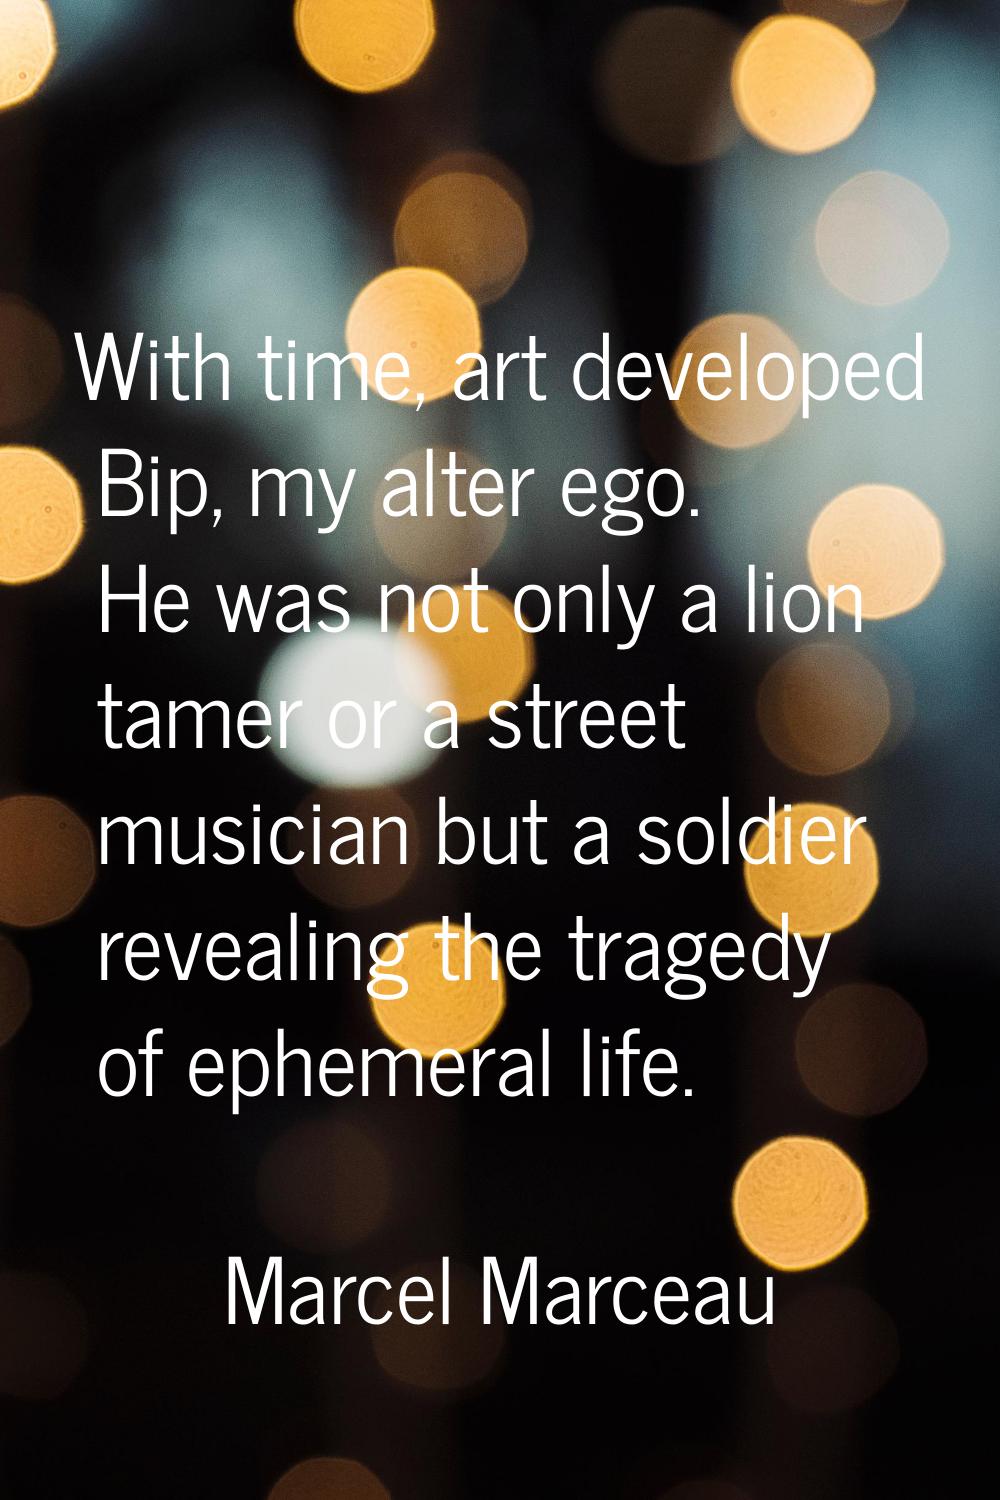 With time, art developed Bip, my alter ego. He was not only a lion tamer or a street musician but a